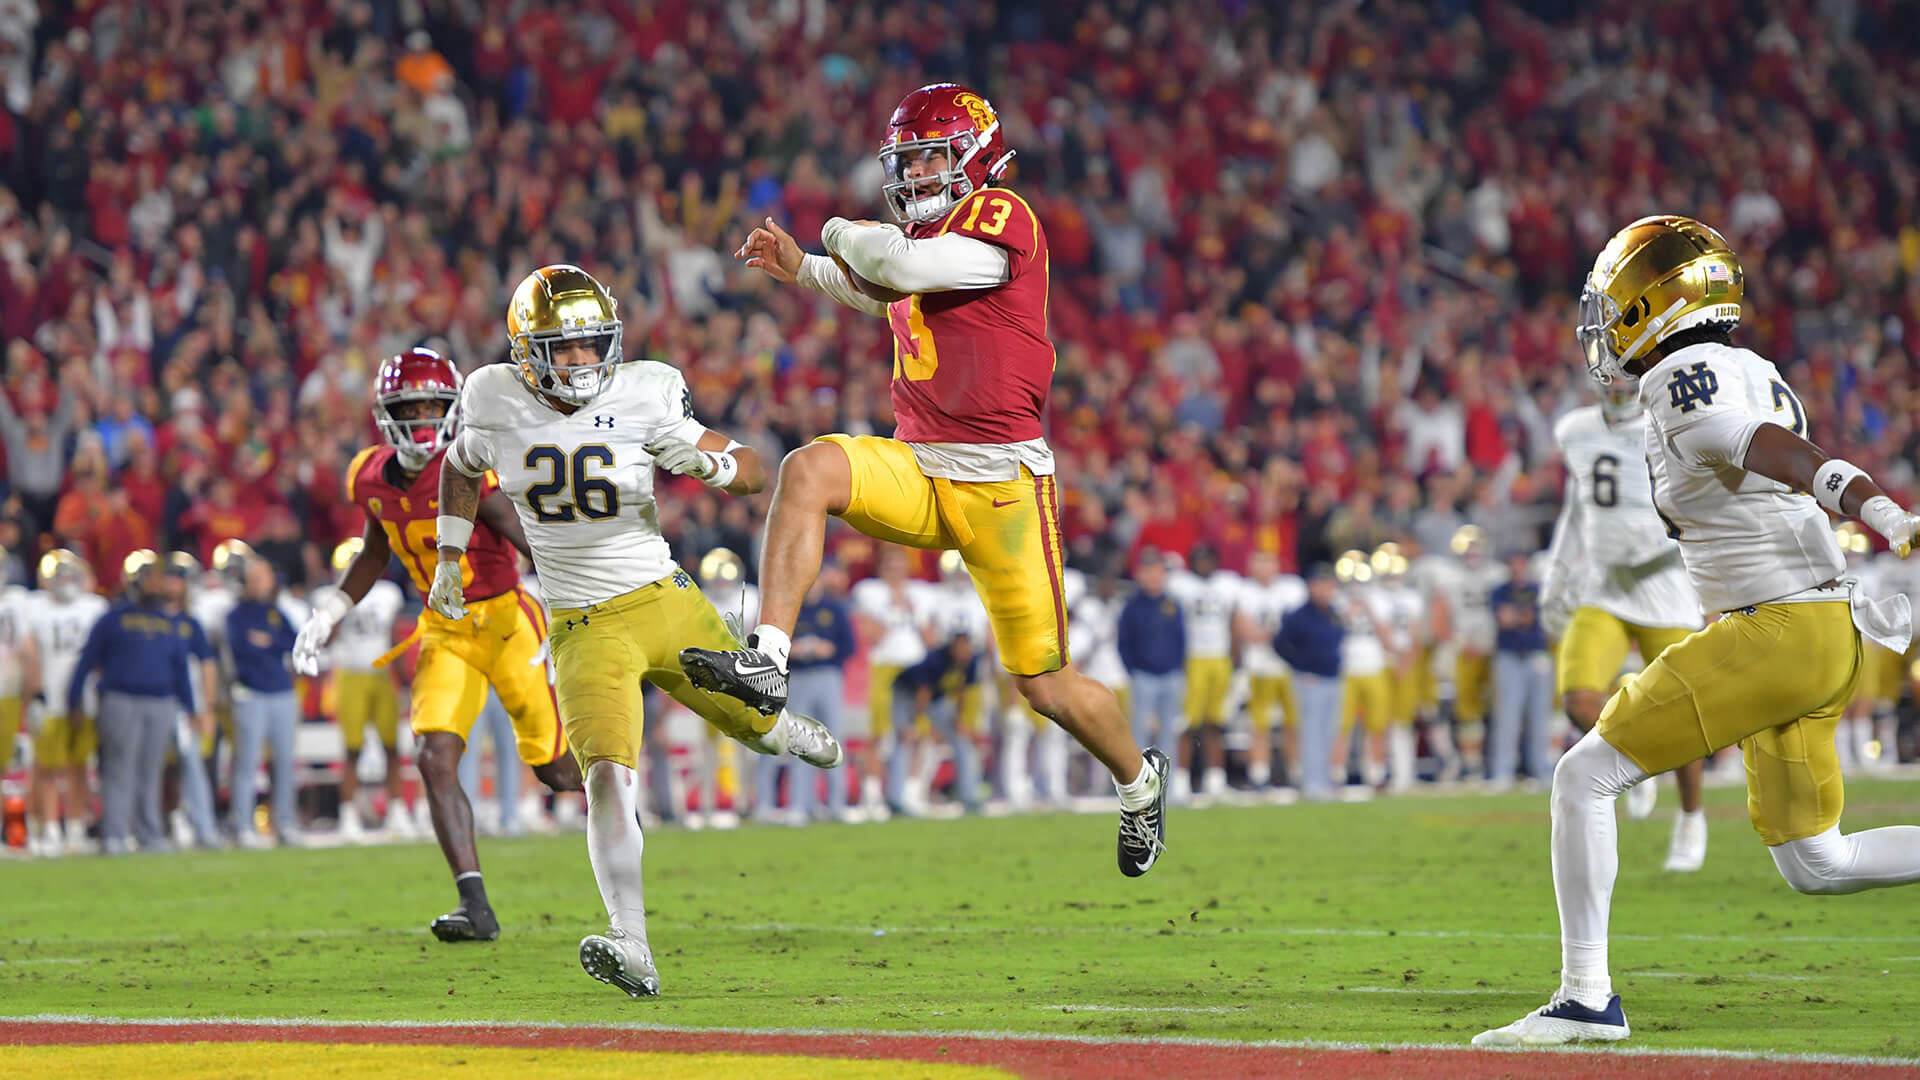 Caleb Williams Likely Heisman Winner, But USC Have Long Title Odds